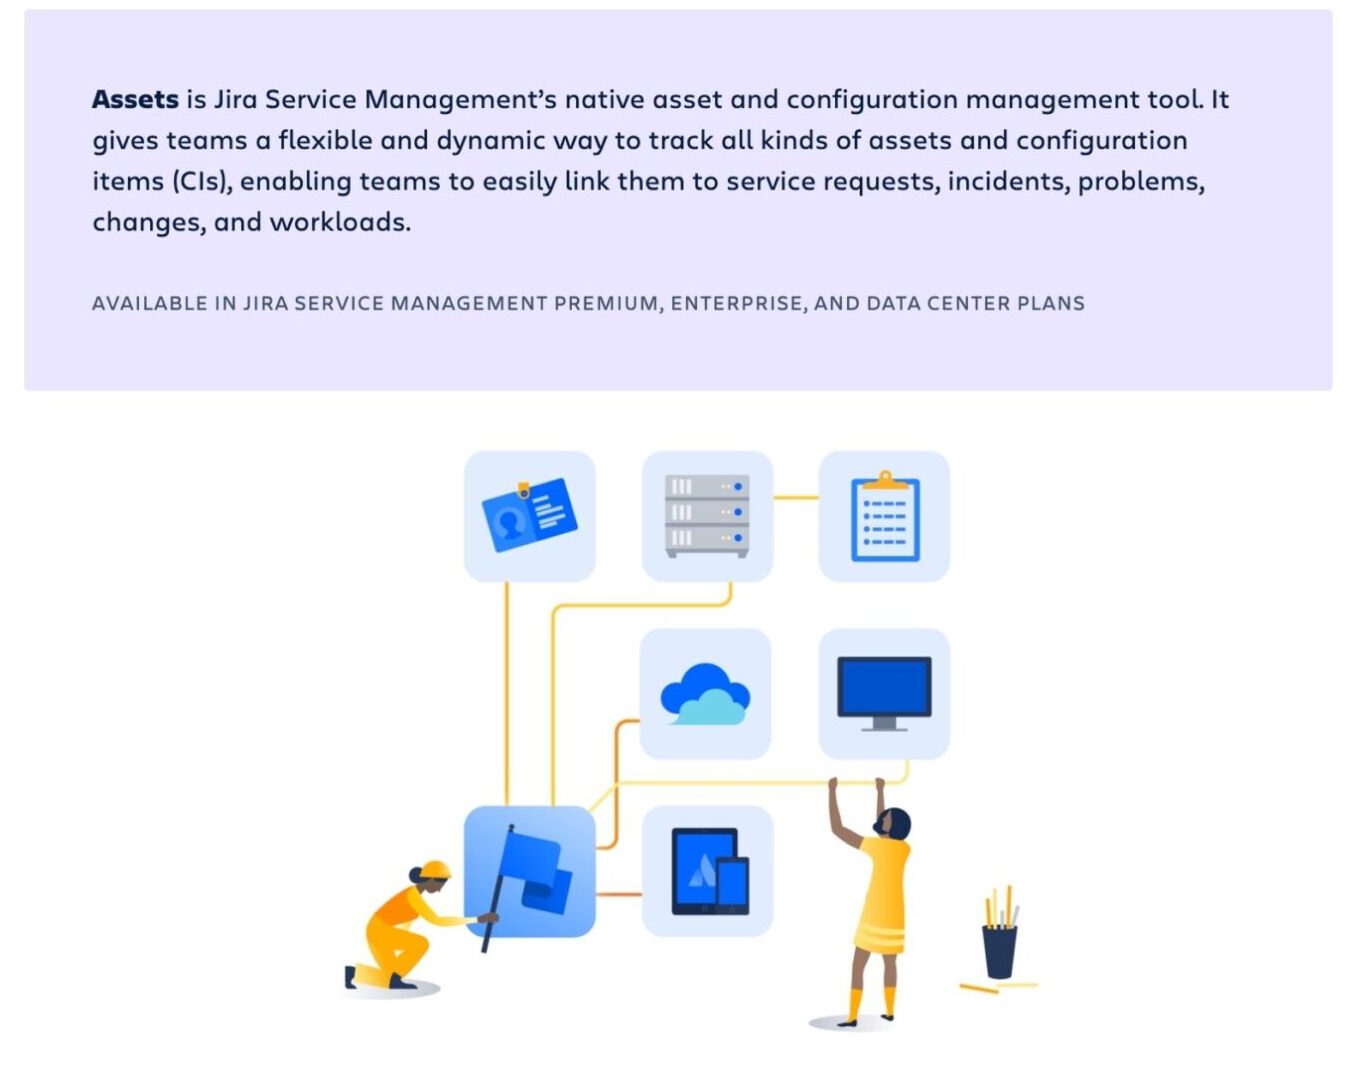 Assets in Jira Service Management